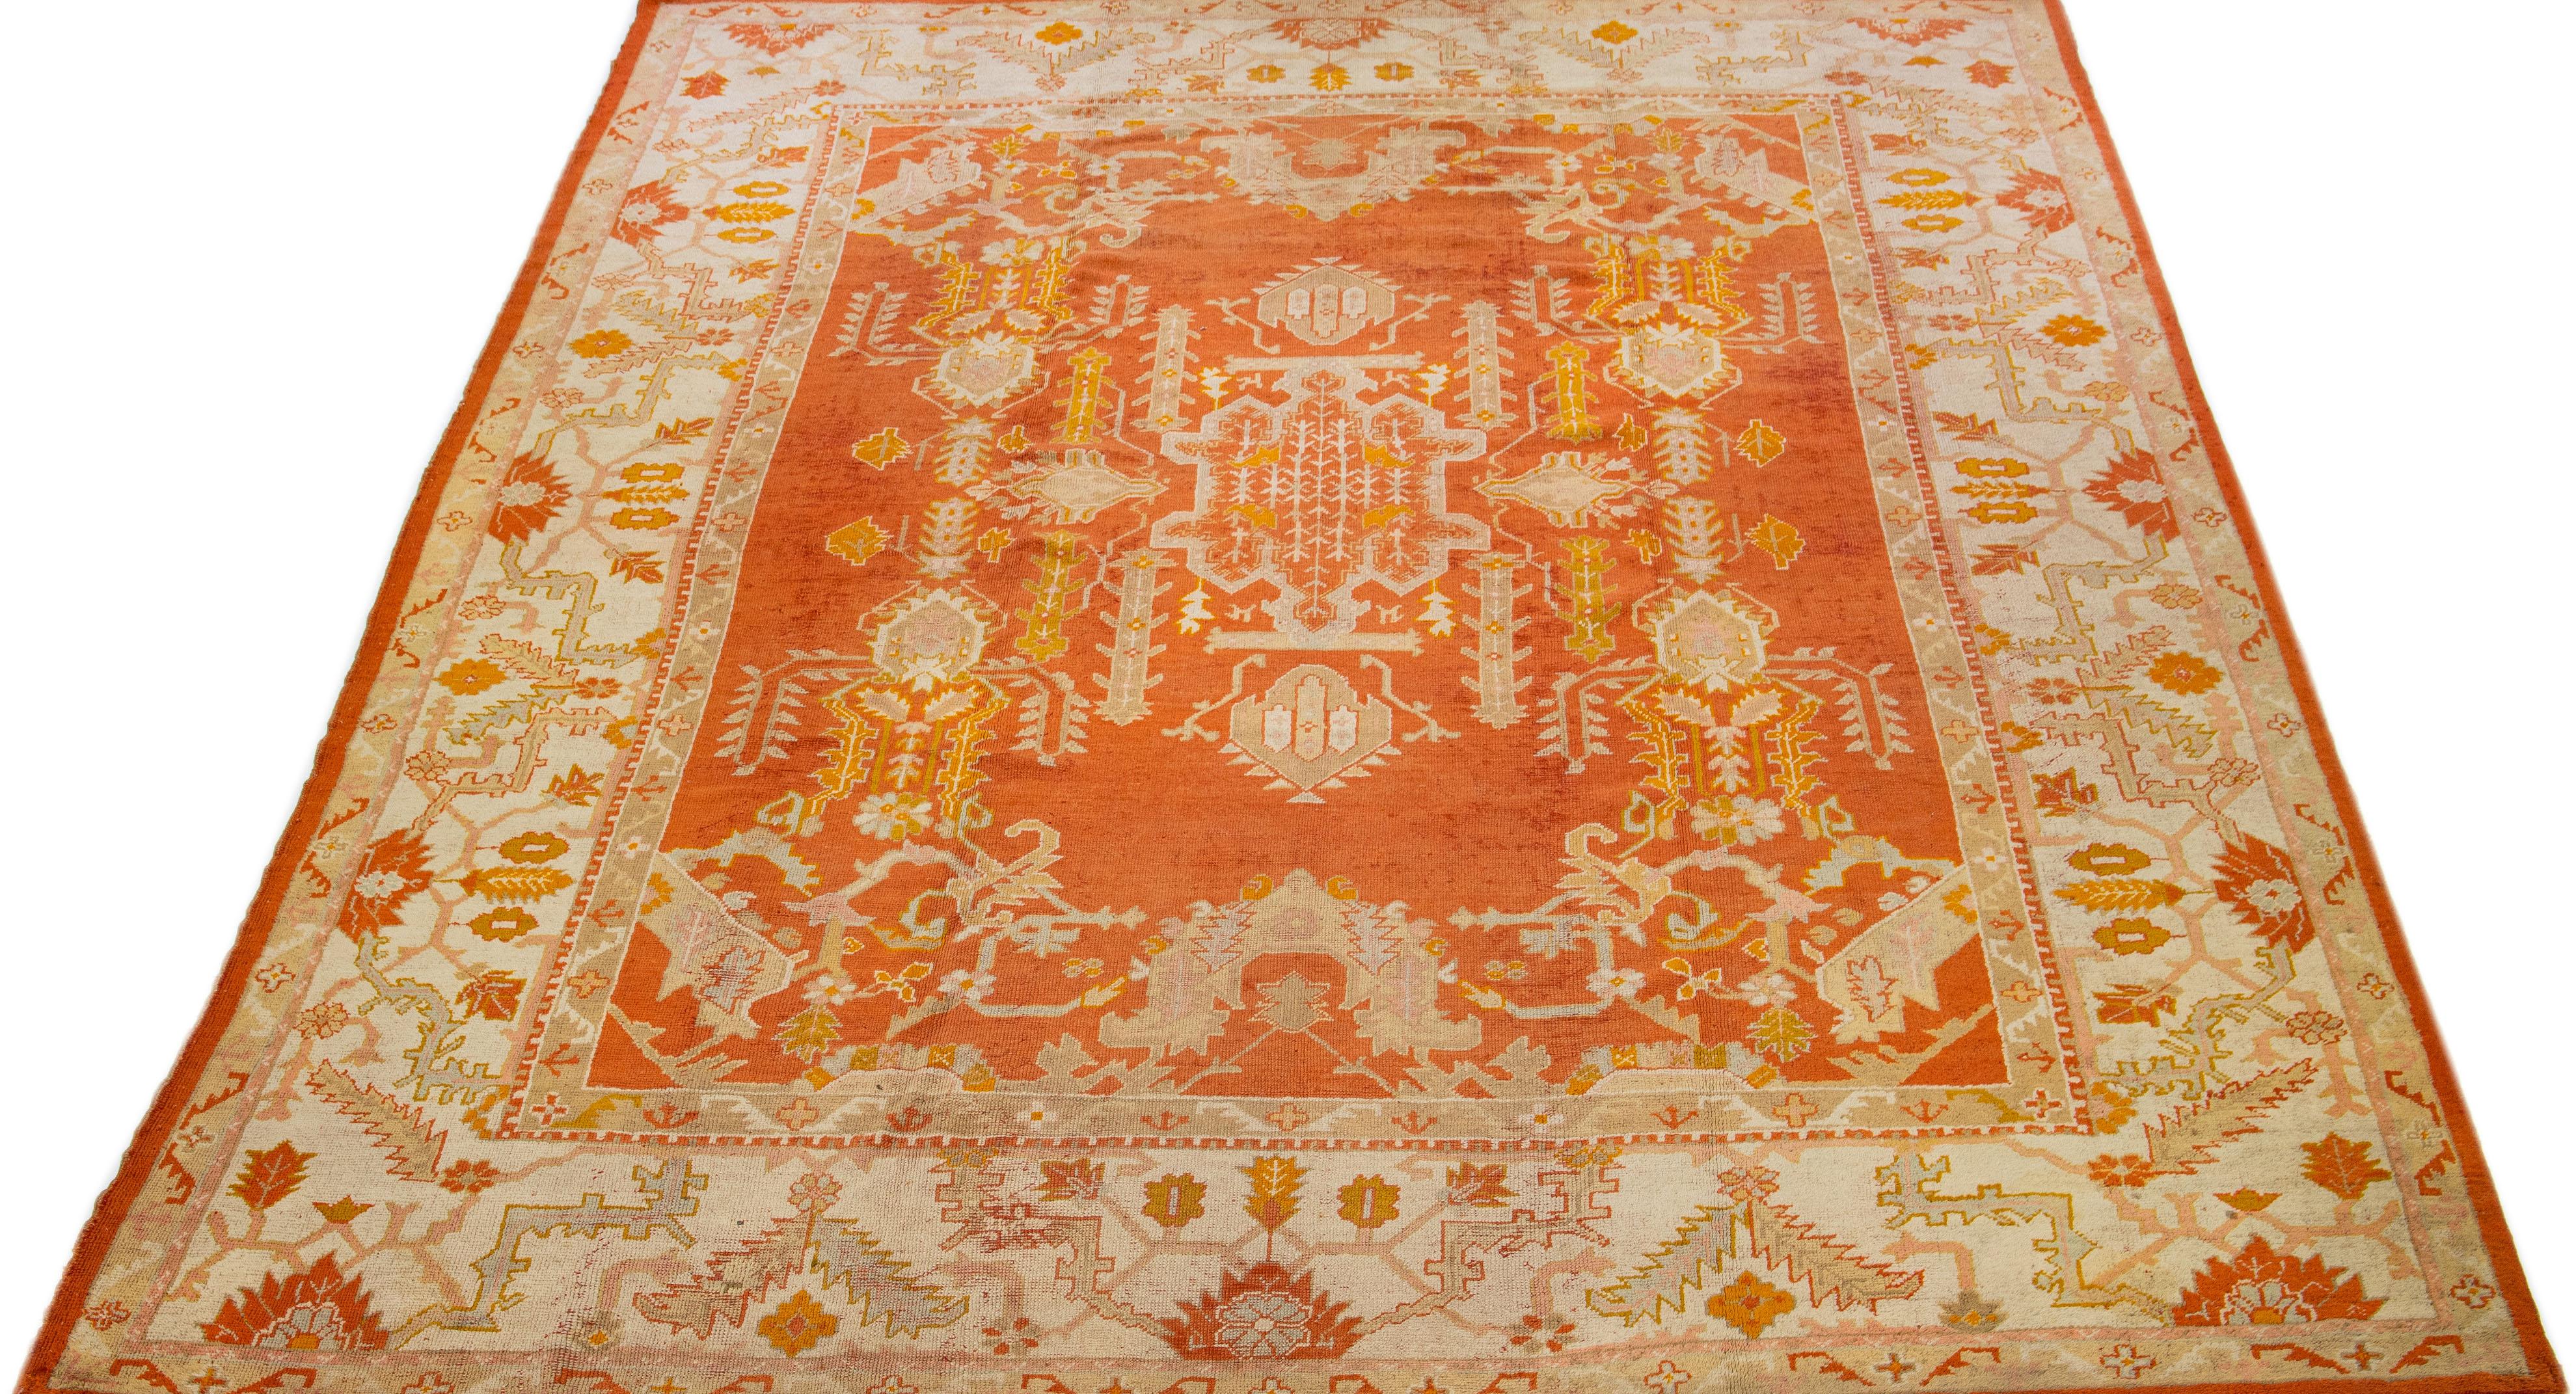 Beautiful Antique Turkish hand knotted wool rug with an orange color field. This rug has a designed frame with tan, beige, and goldenrod accent colors in a gorgeous all-over medallion floral design.

This rug measures 10'2